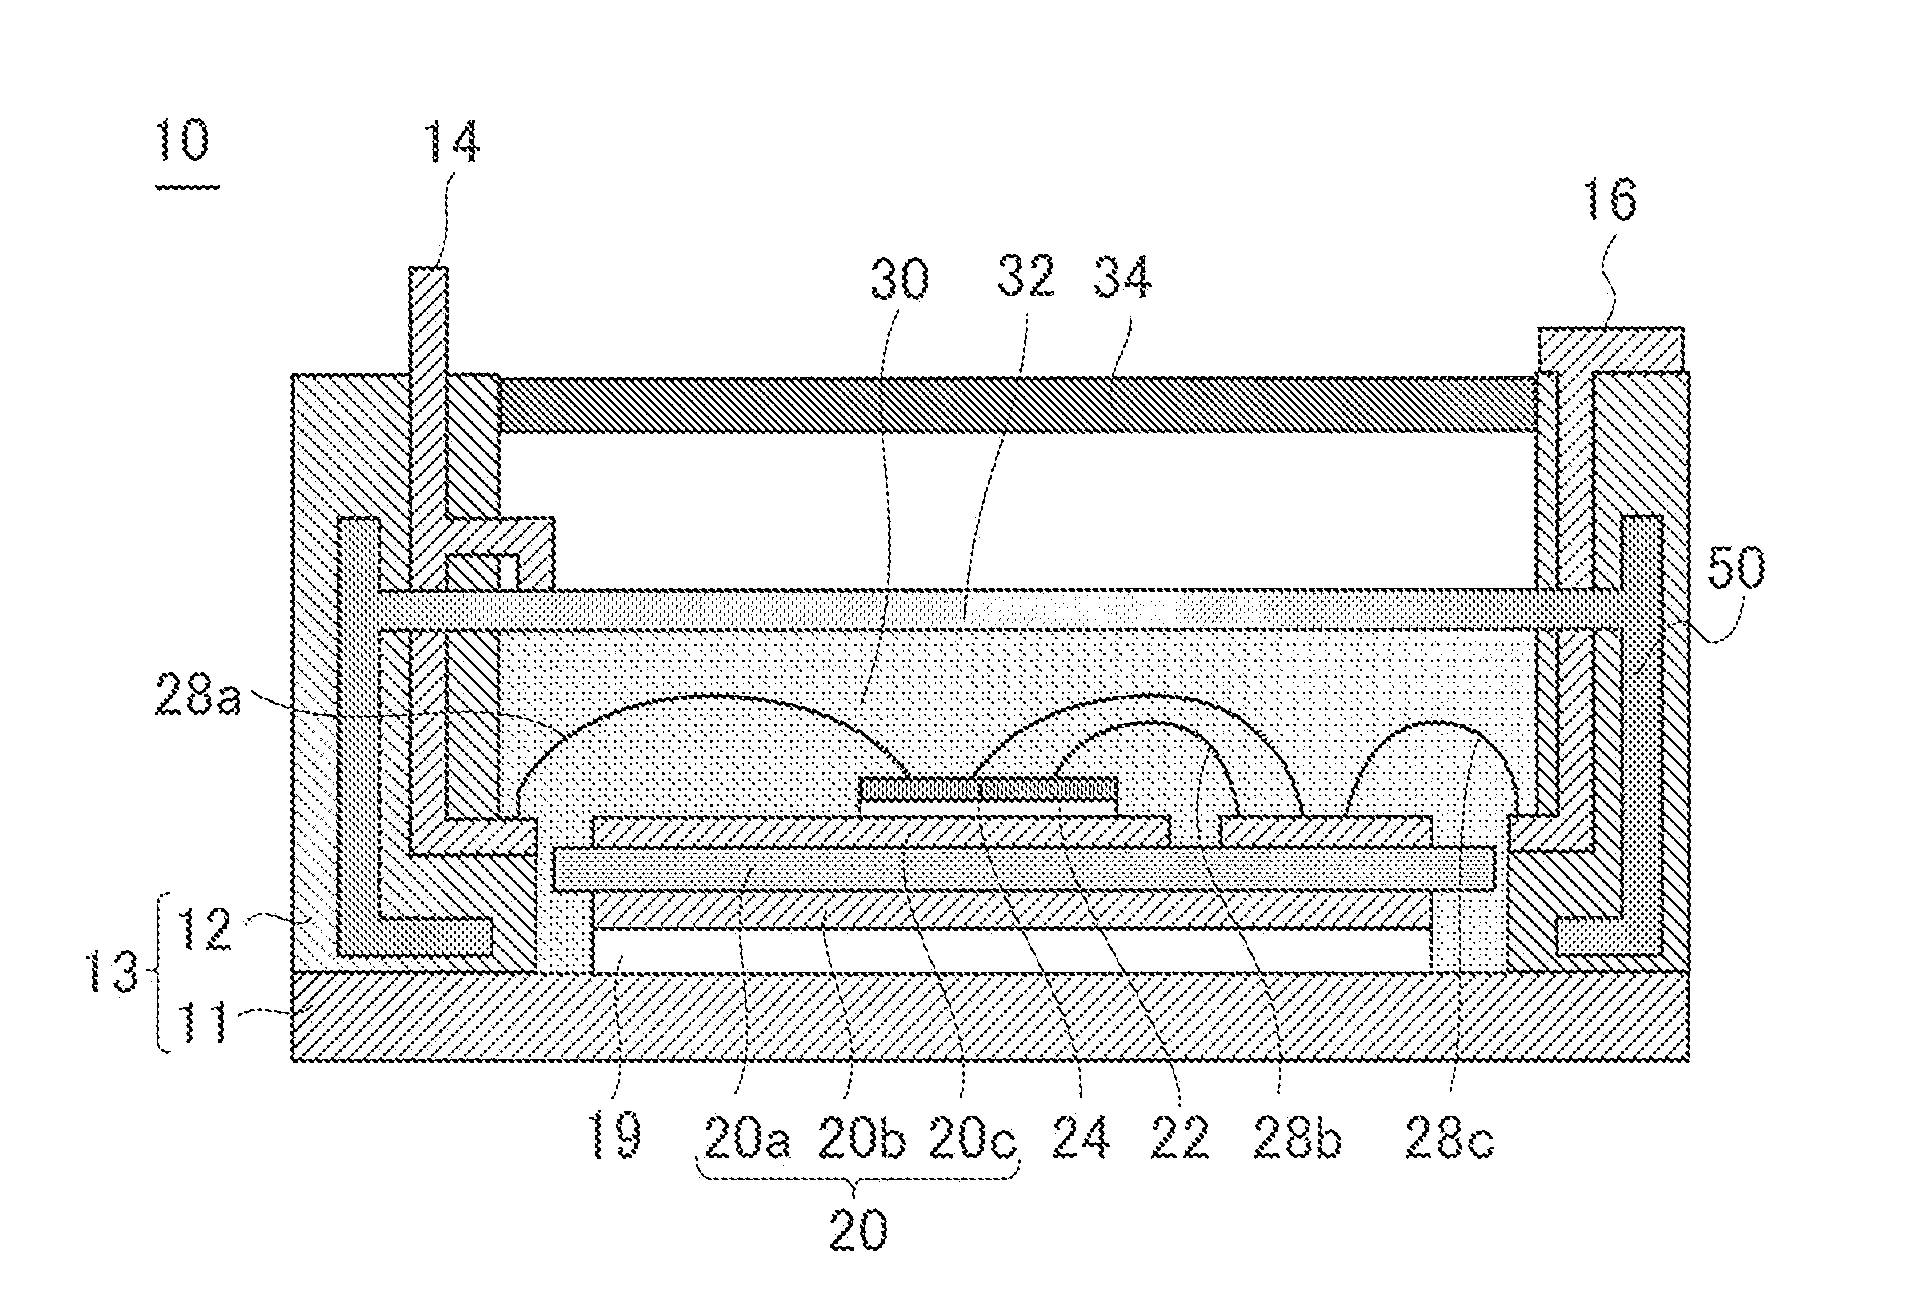 Semiconductor module and power converter